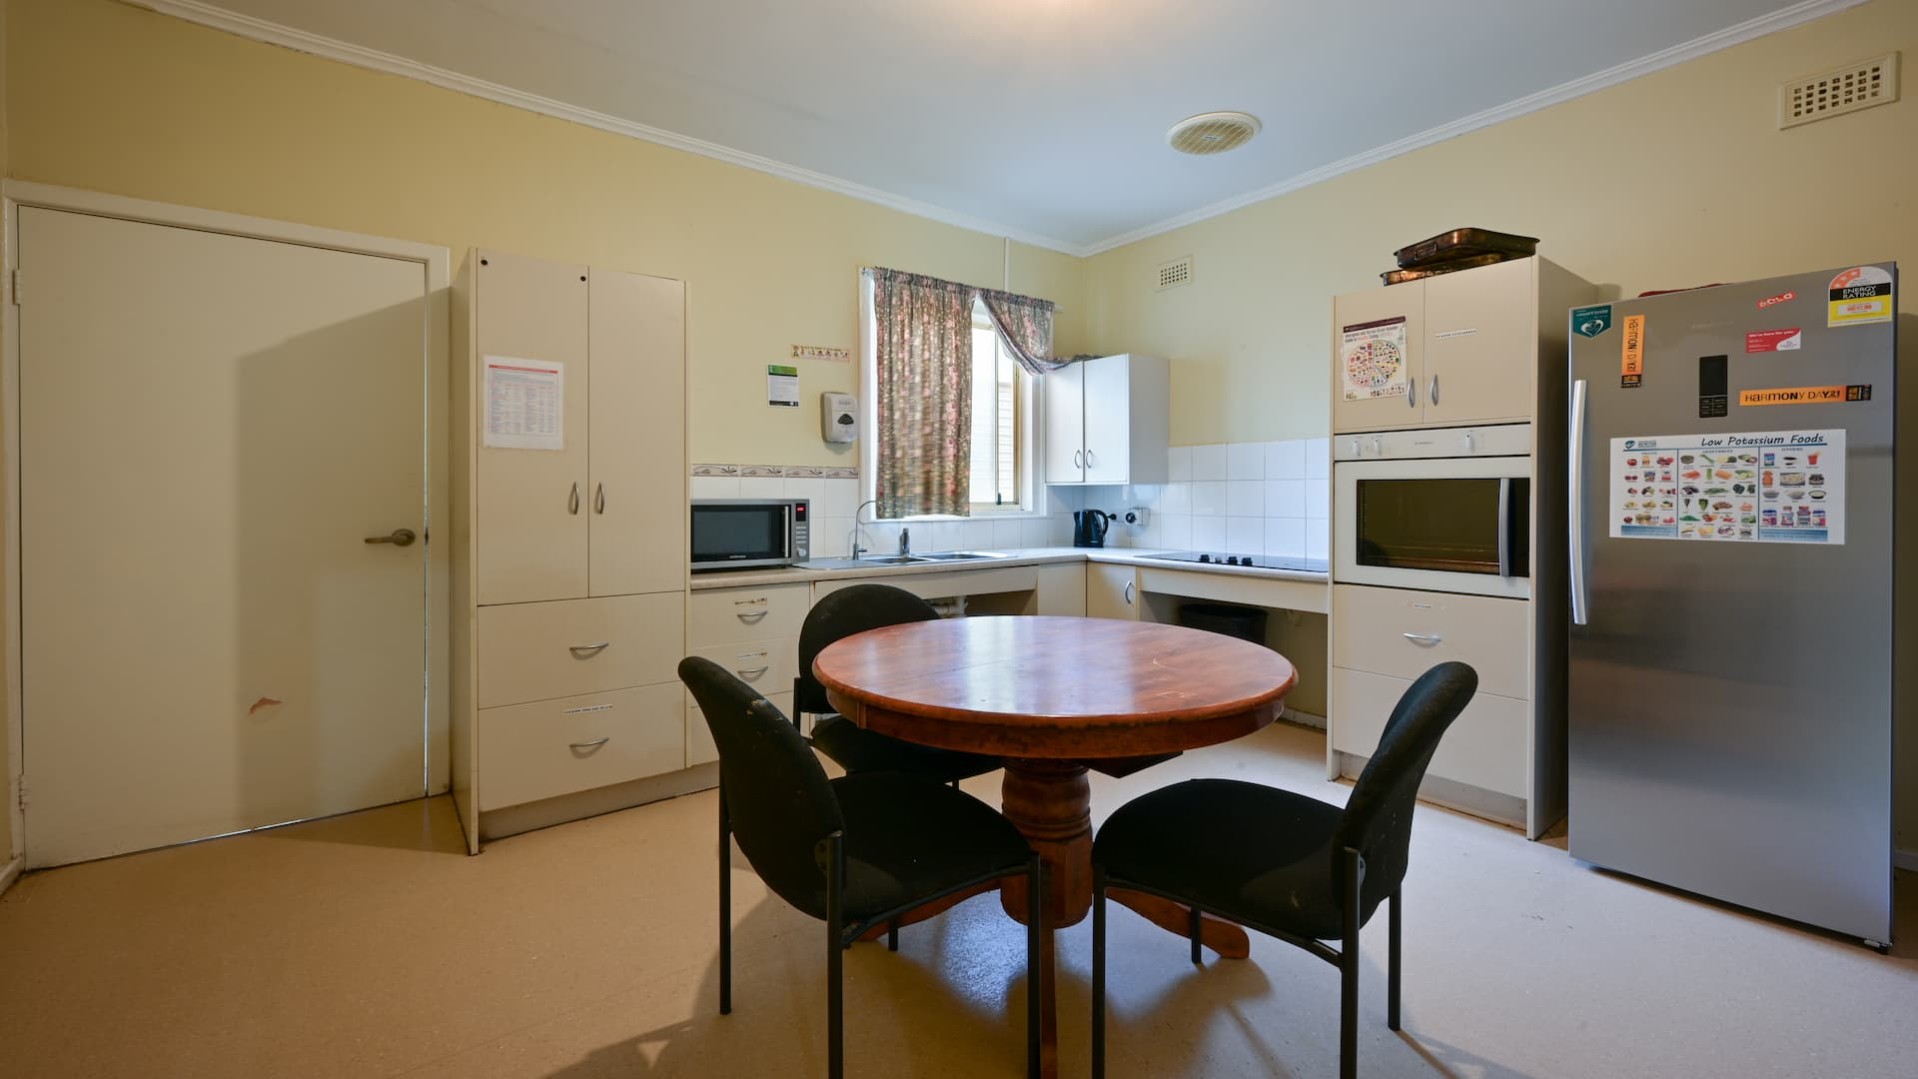 --Kitchen with cream cabinets and benches, a microwave, oven, stove, fridge and round dining table.--